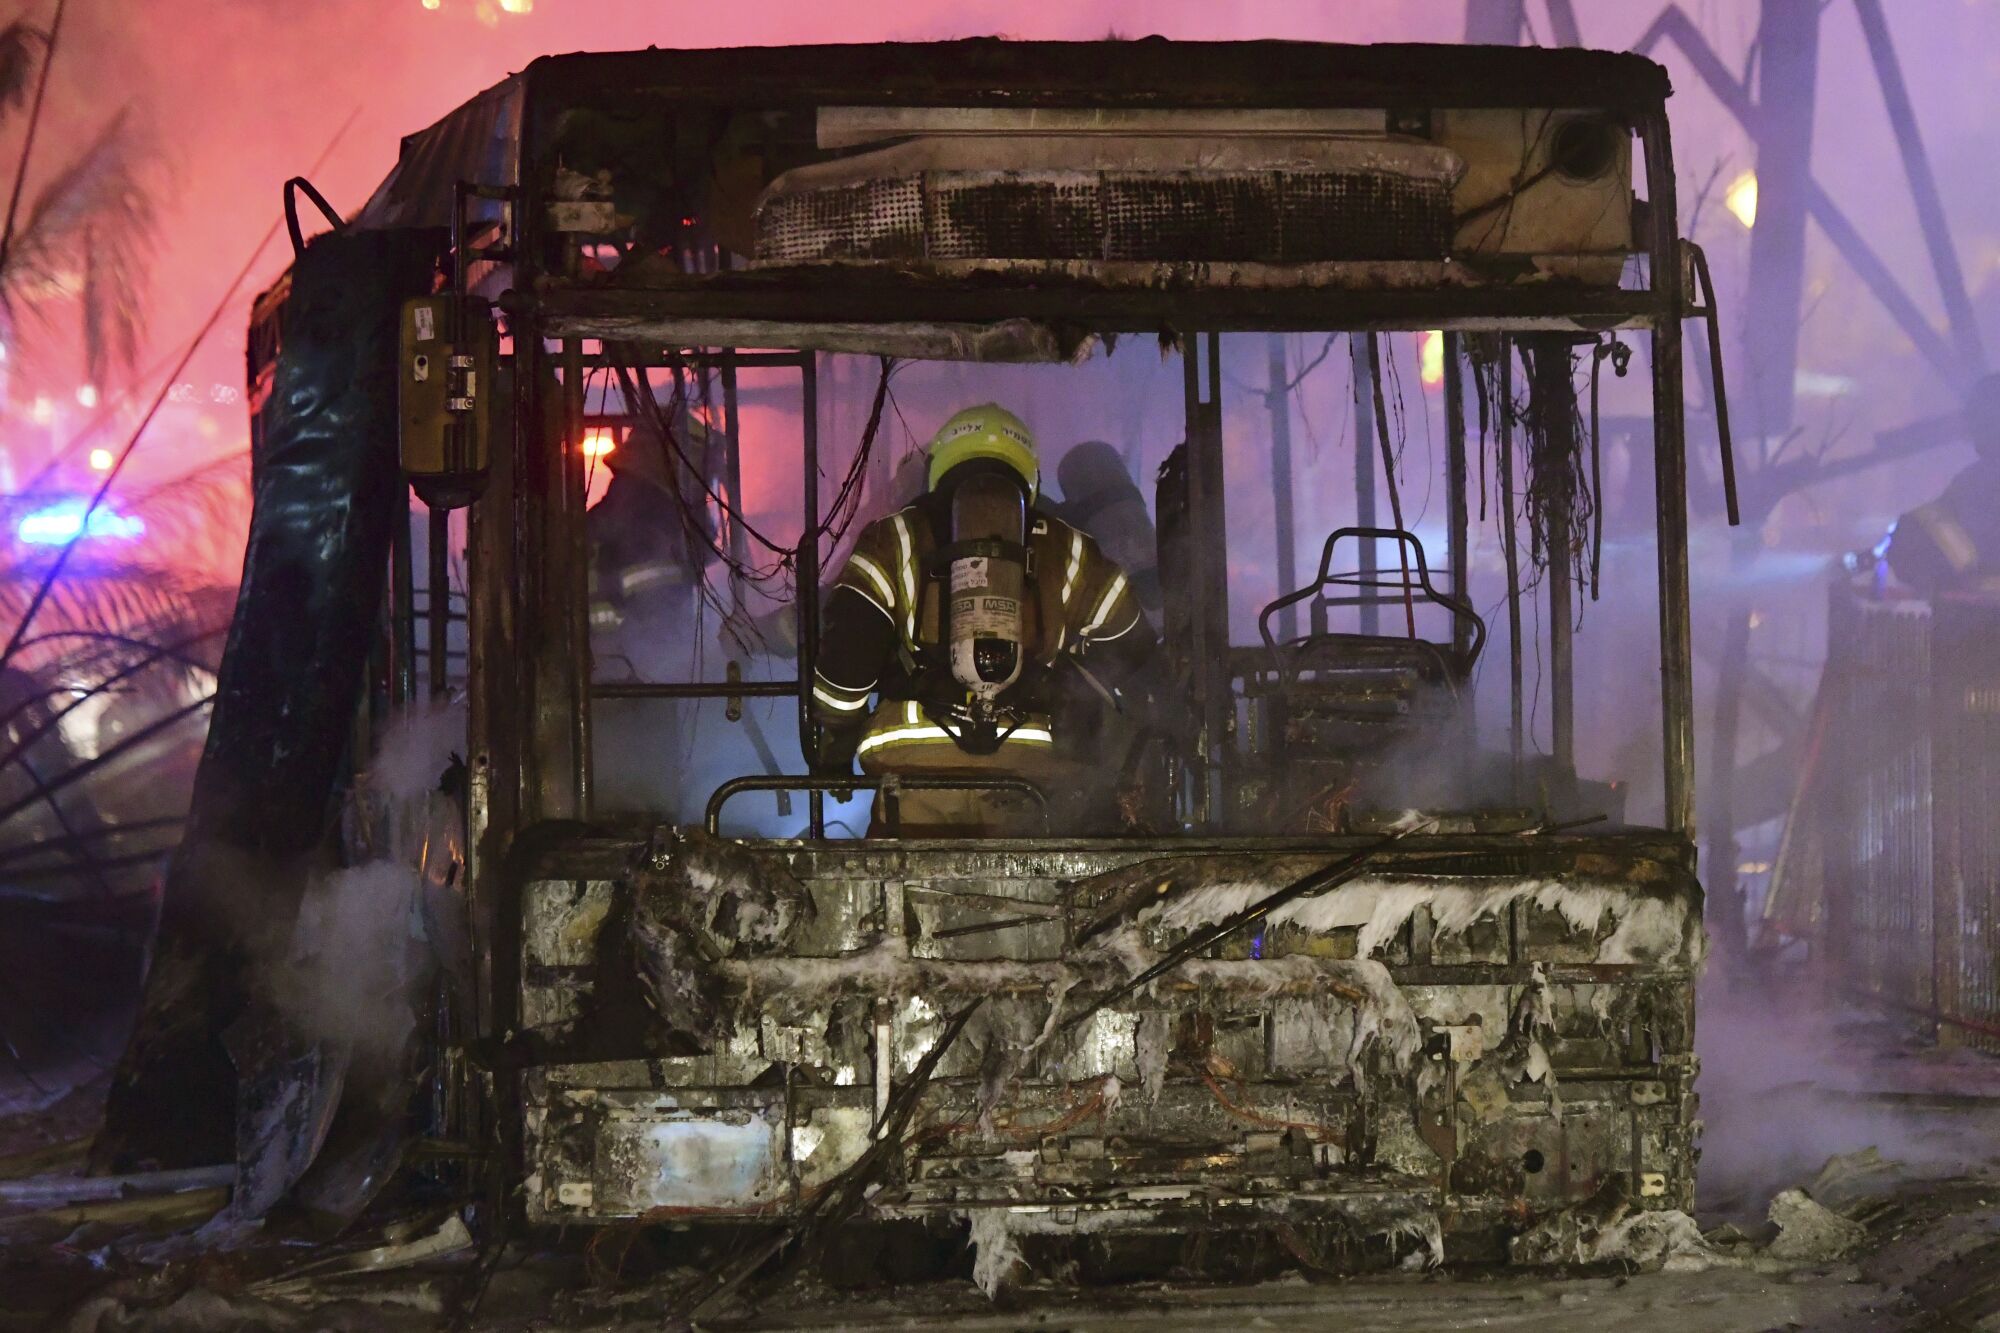 A  firefighter stand in the scorched wreckage of a bus 